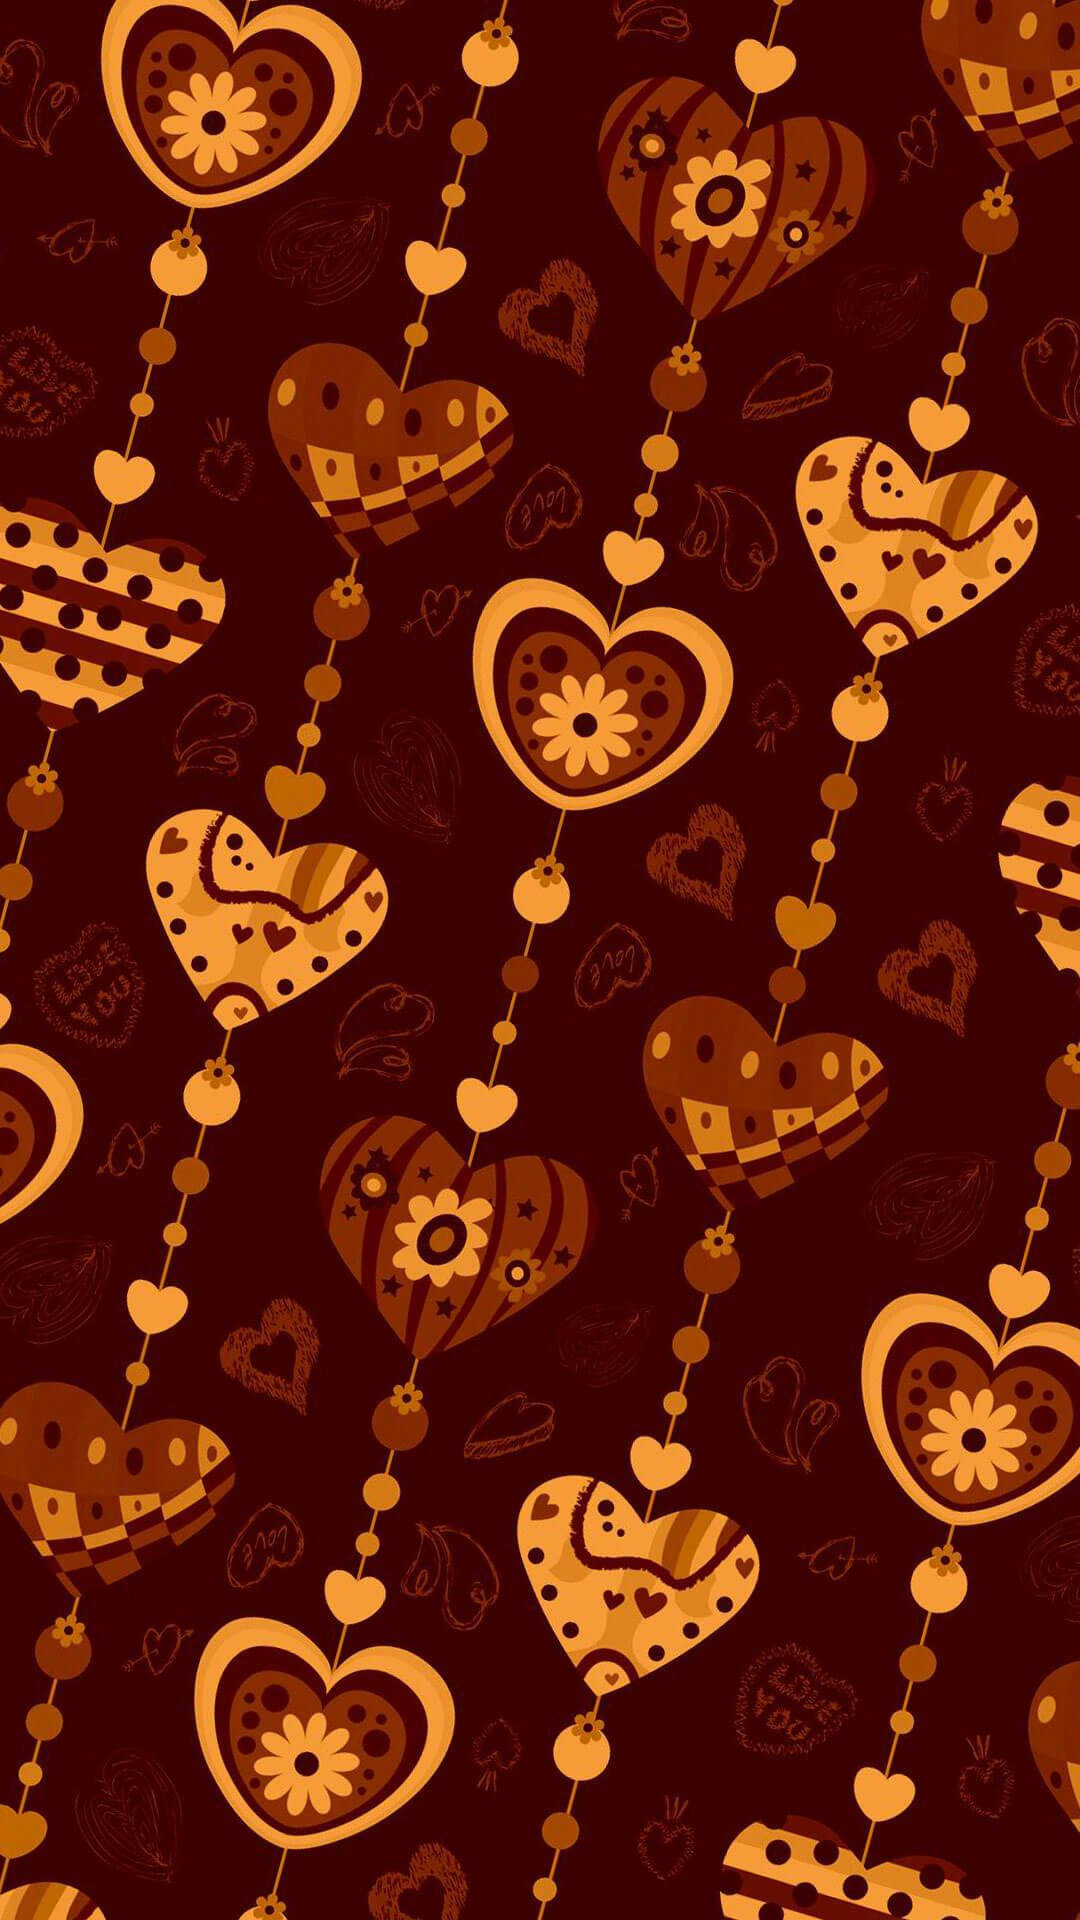 Heart Shapes Brown Iphone Wallpaper